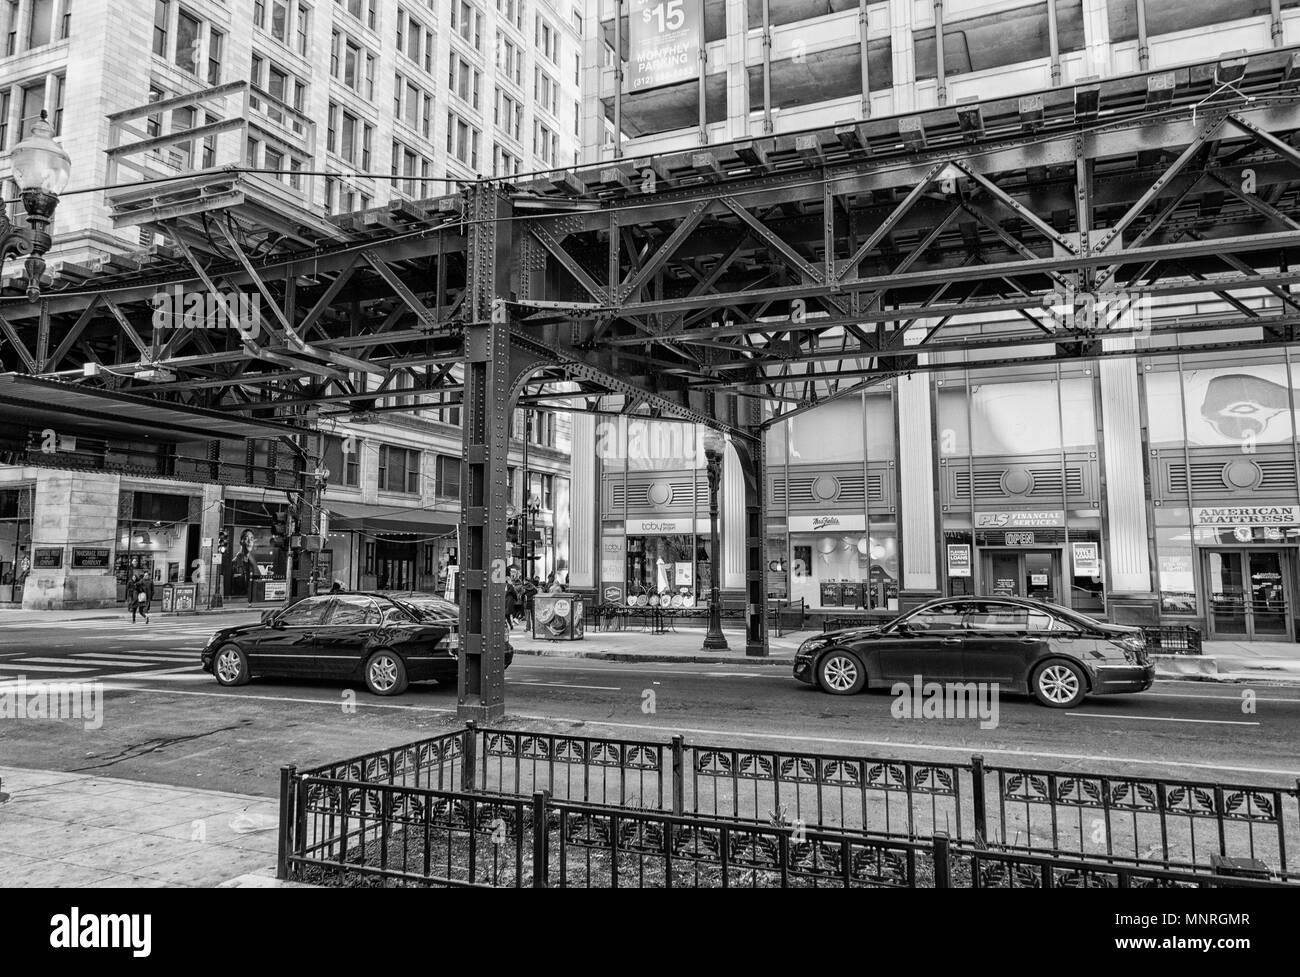 Elevated train track The Loop running down street in Chicago, USA in black and white Stock Photo